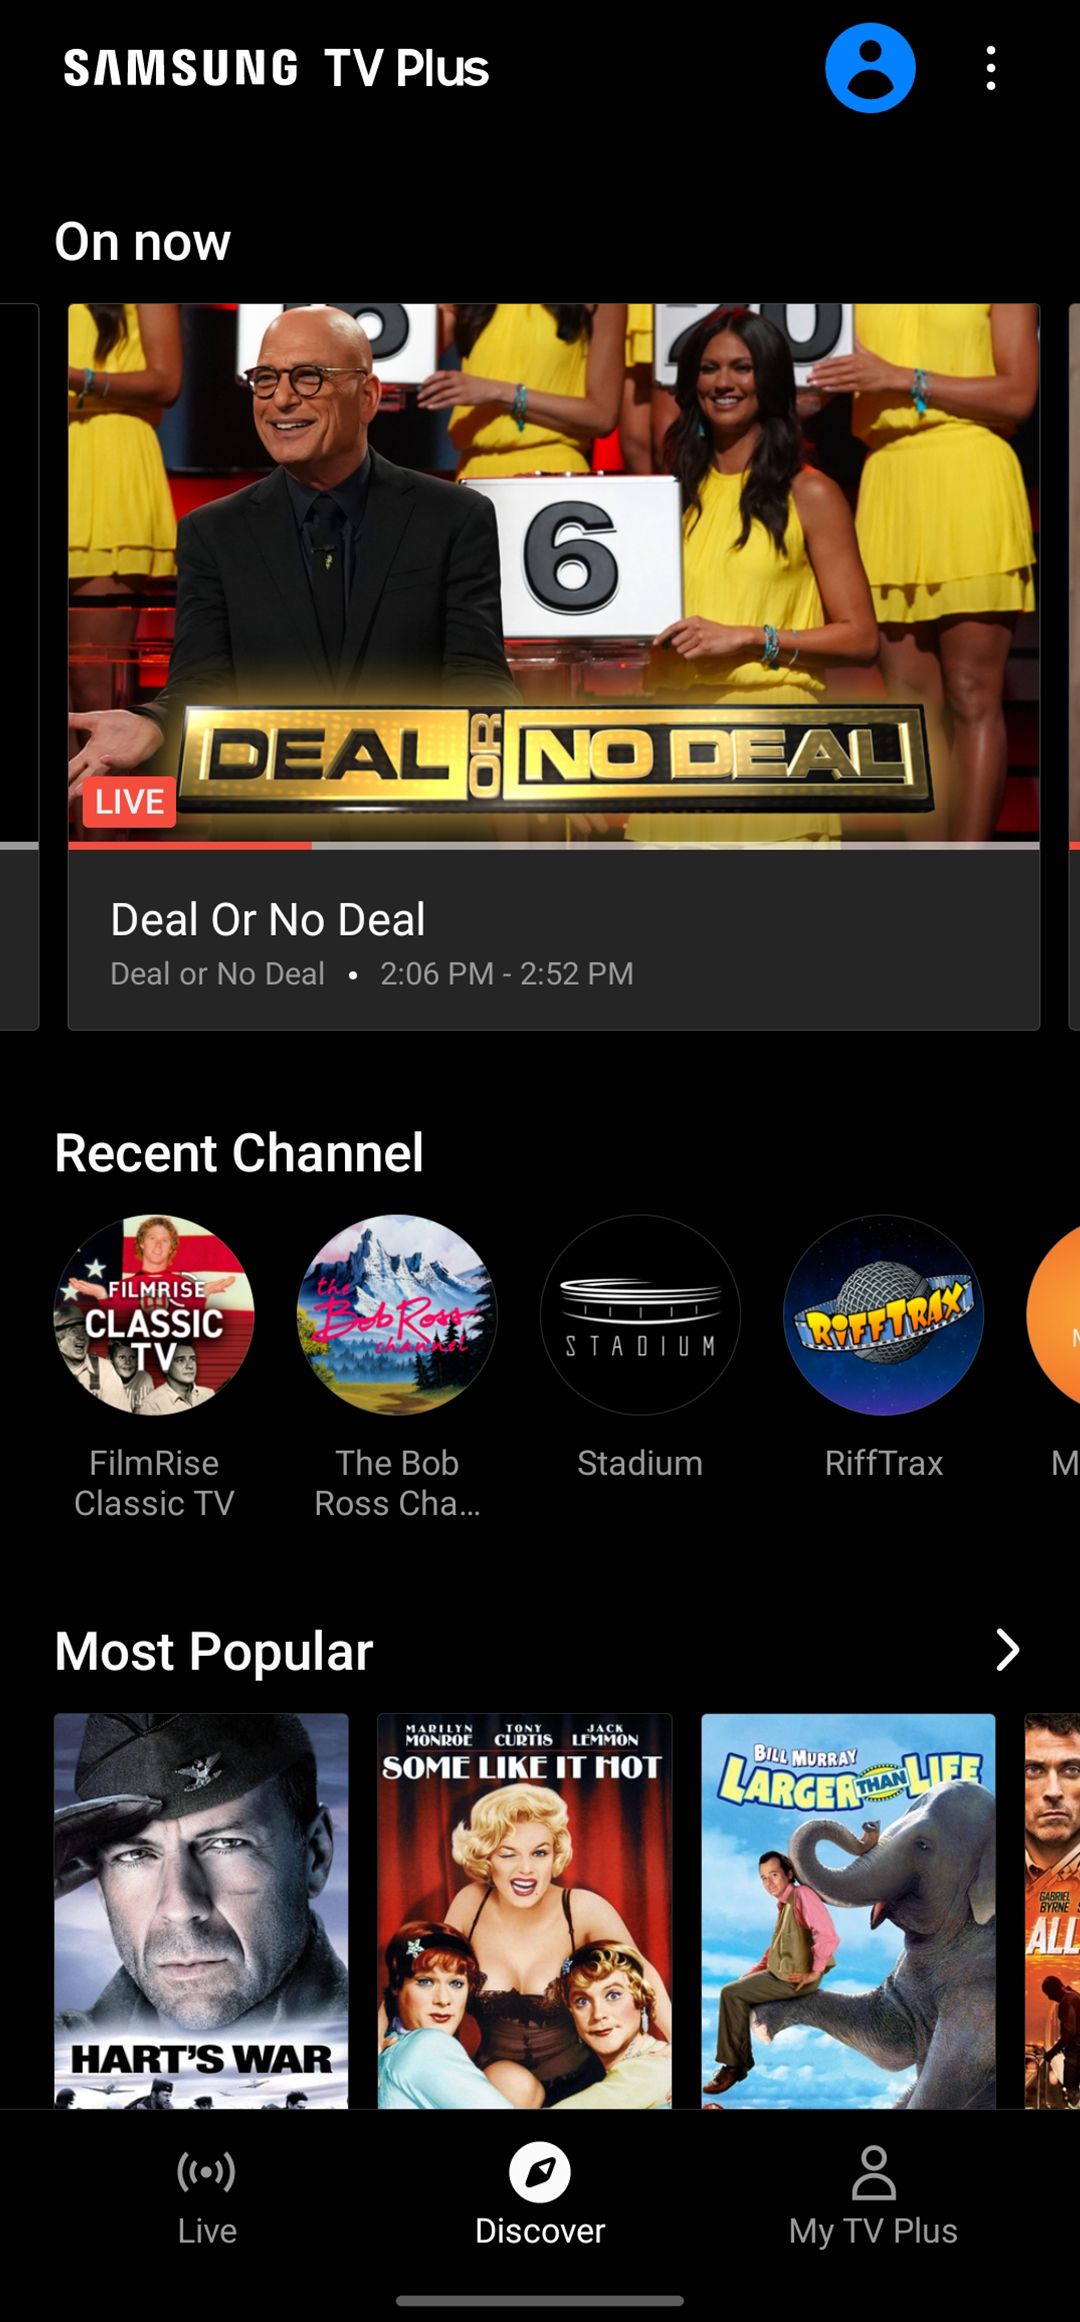 Samsung TV Plus Android App Discover Tab